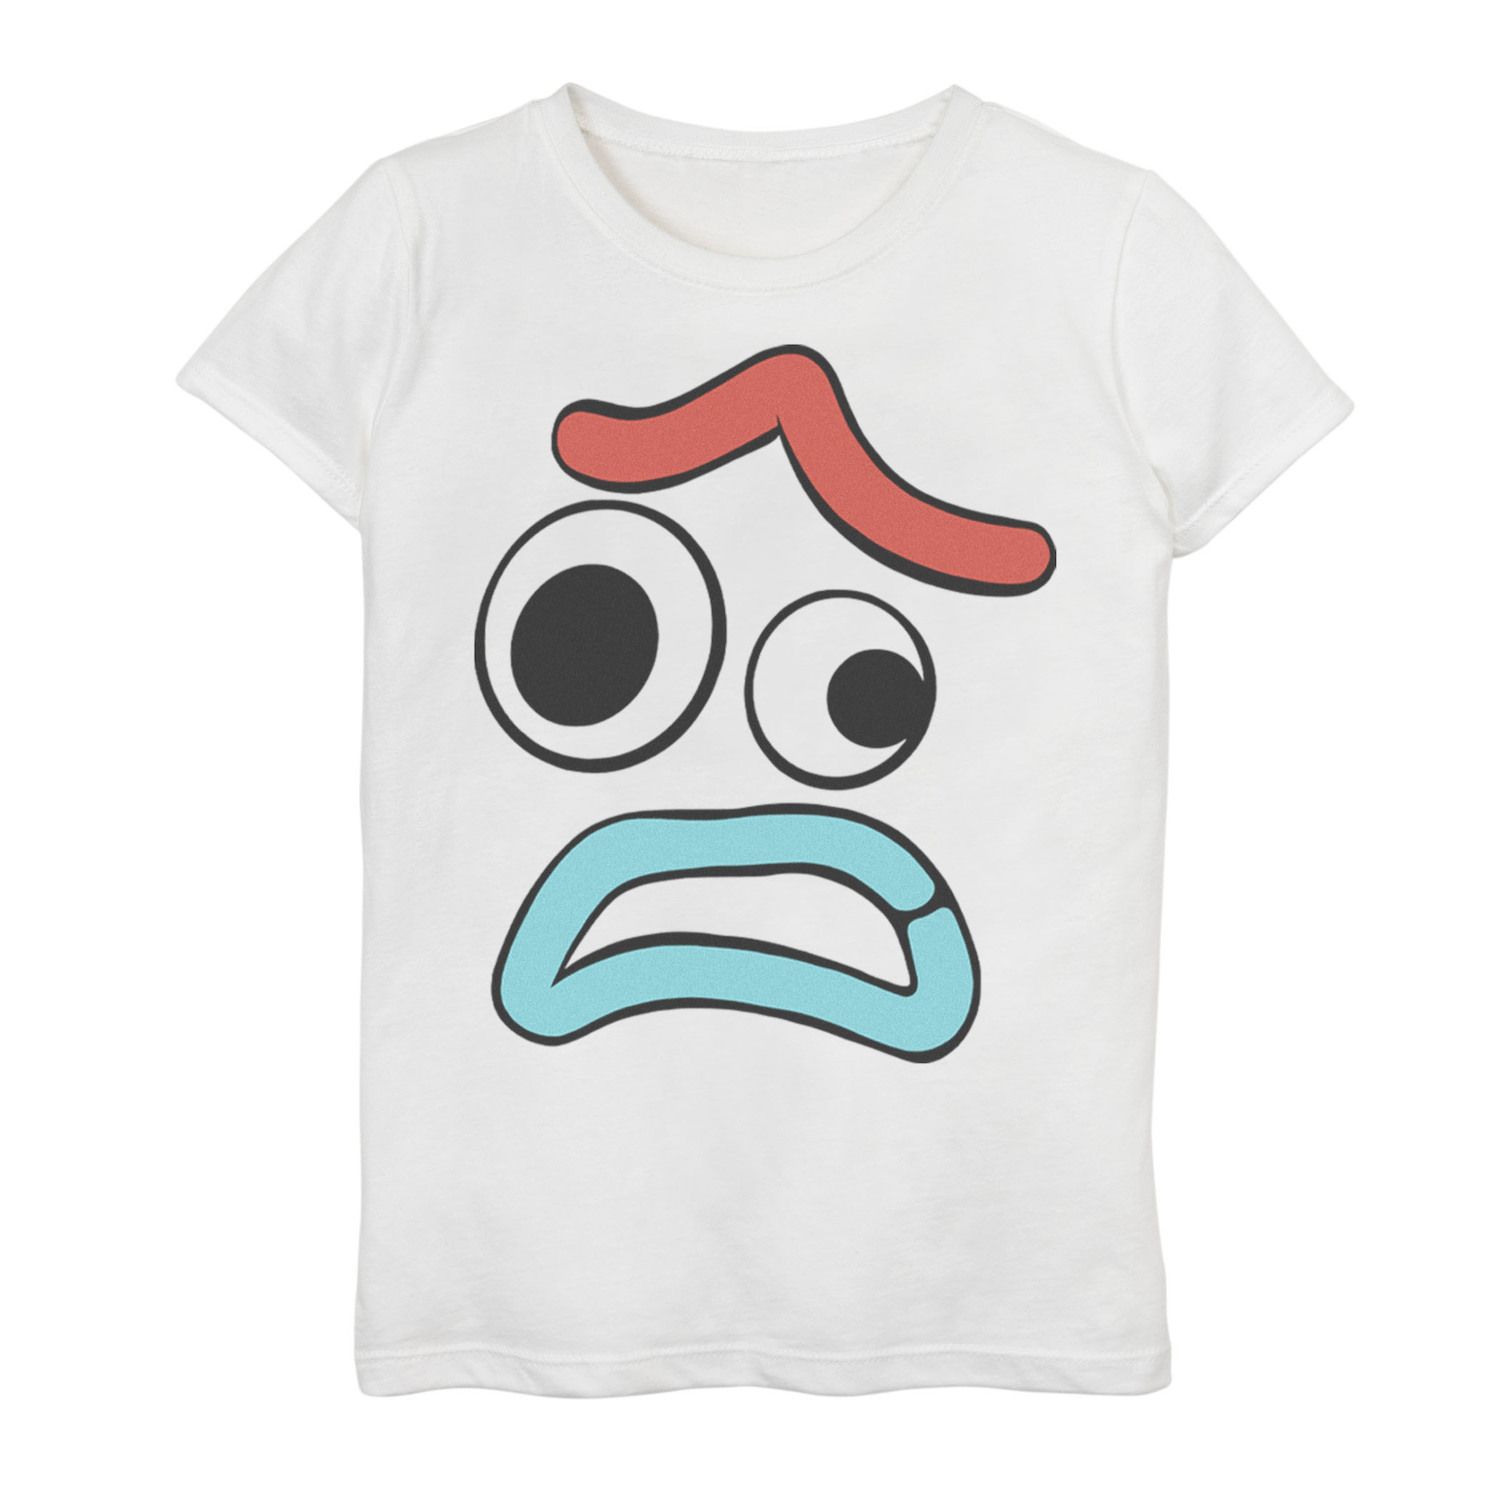 Image for Disney / Pixar 's Toy Story 4 Girls 7-16 Forky Large Upset Face Graphic Tee at Kohl's.